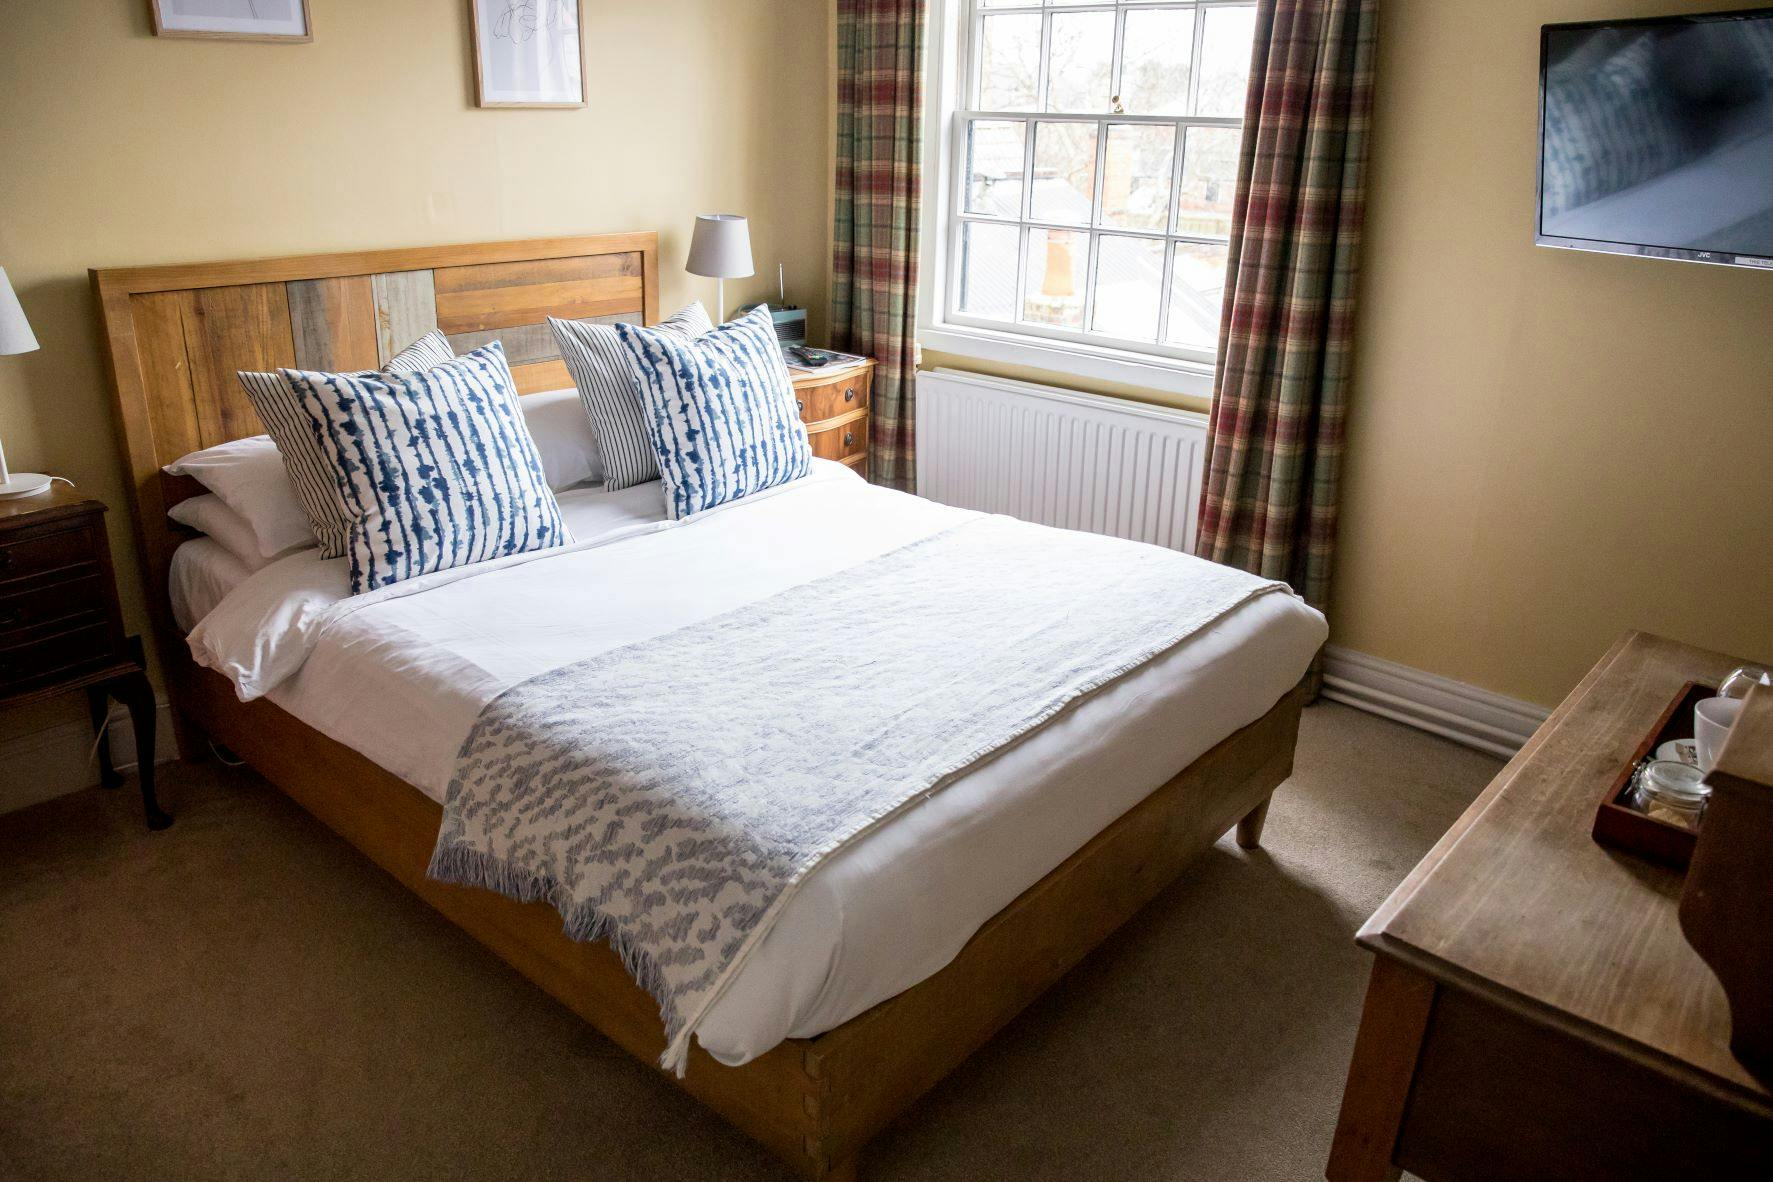 Bedroom accommodation at the Black Swan Devizes